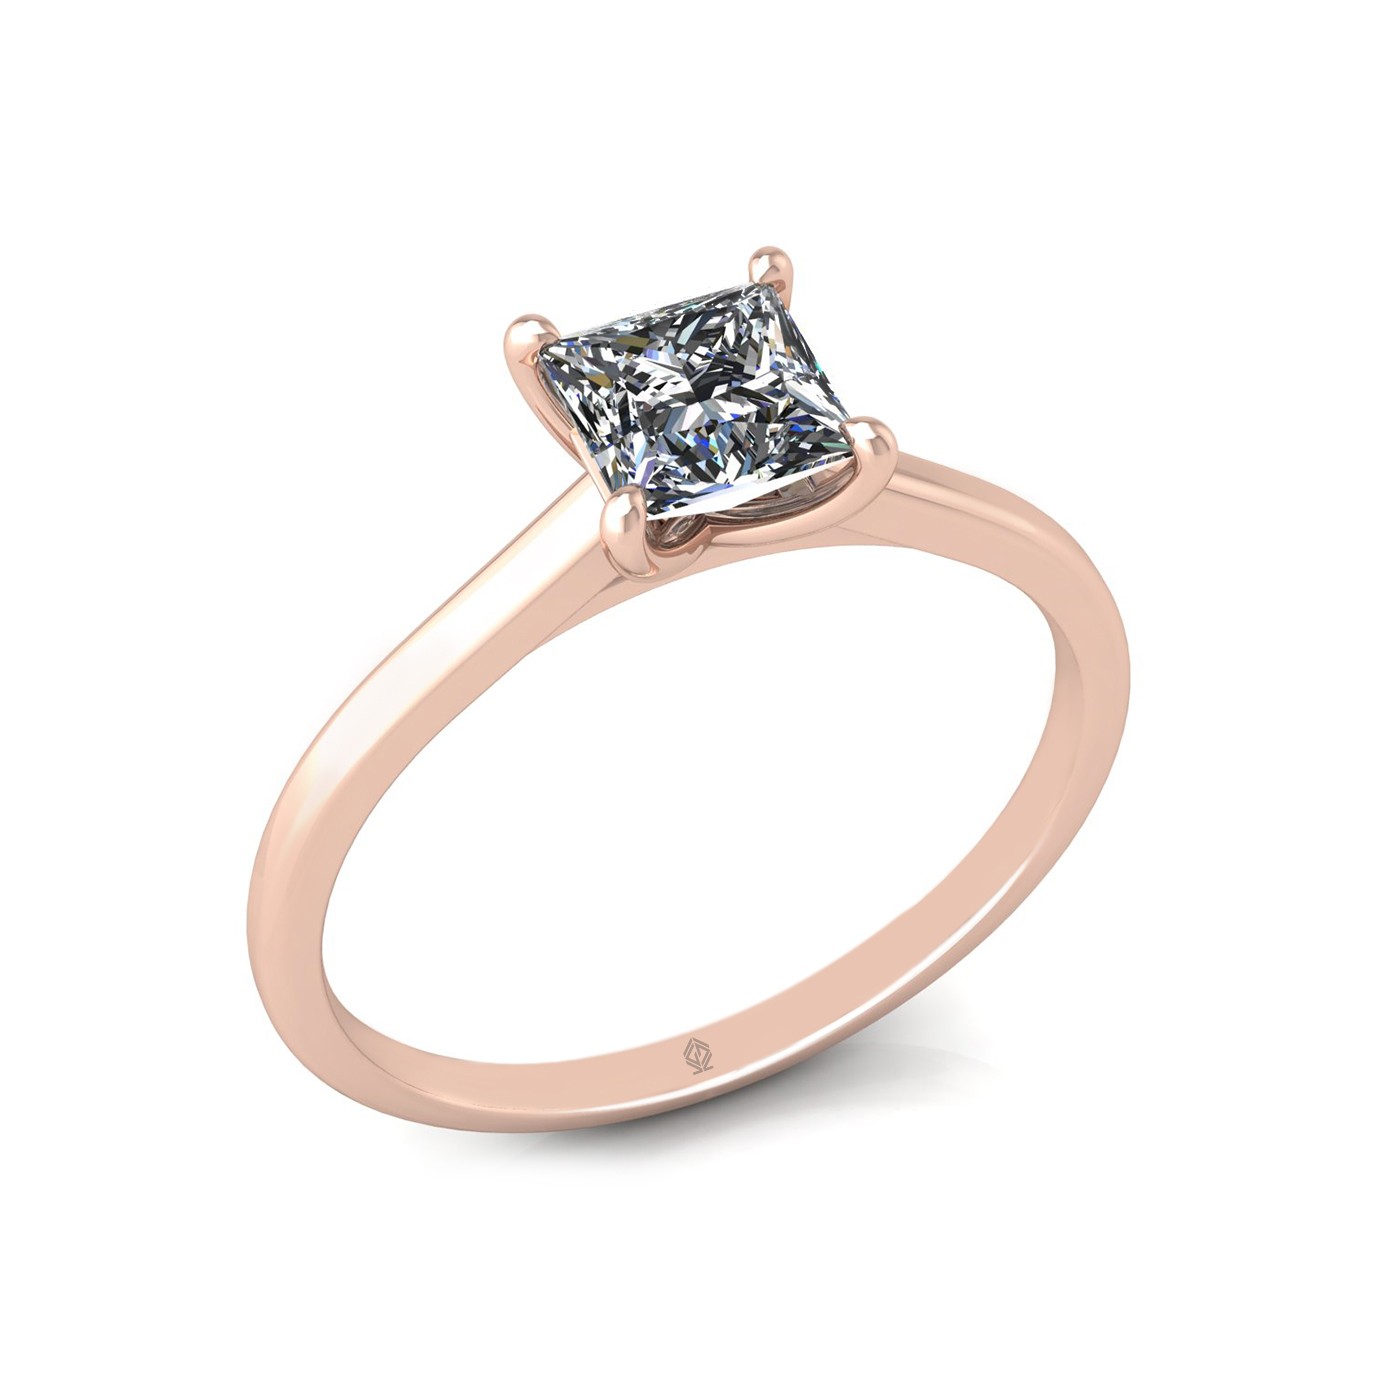 18k rose gold  0,80 ct 4 prongs solitaire princess cut diamond engagement ring with whisper thin band